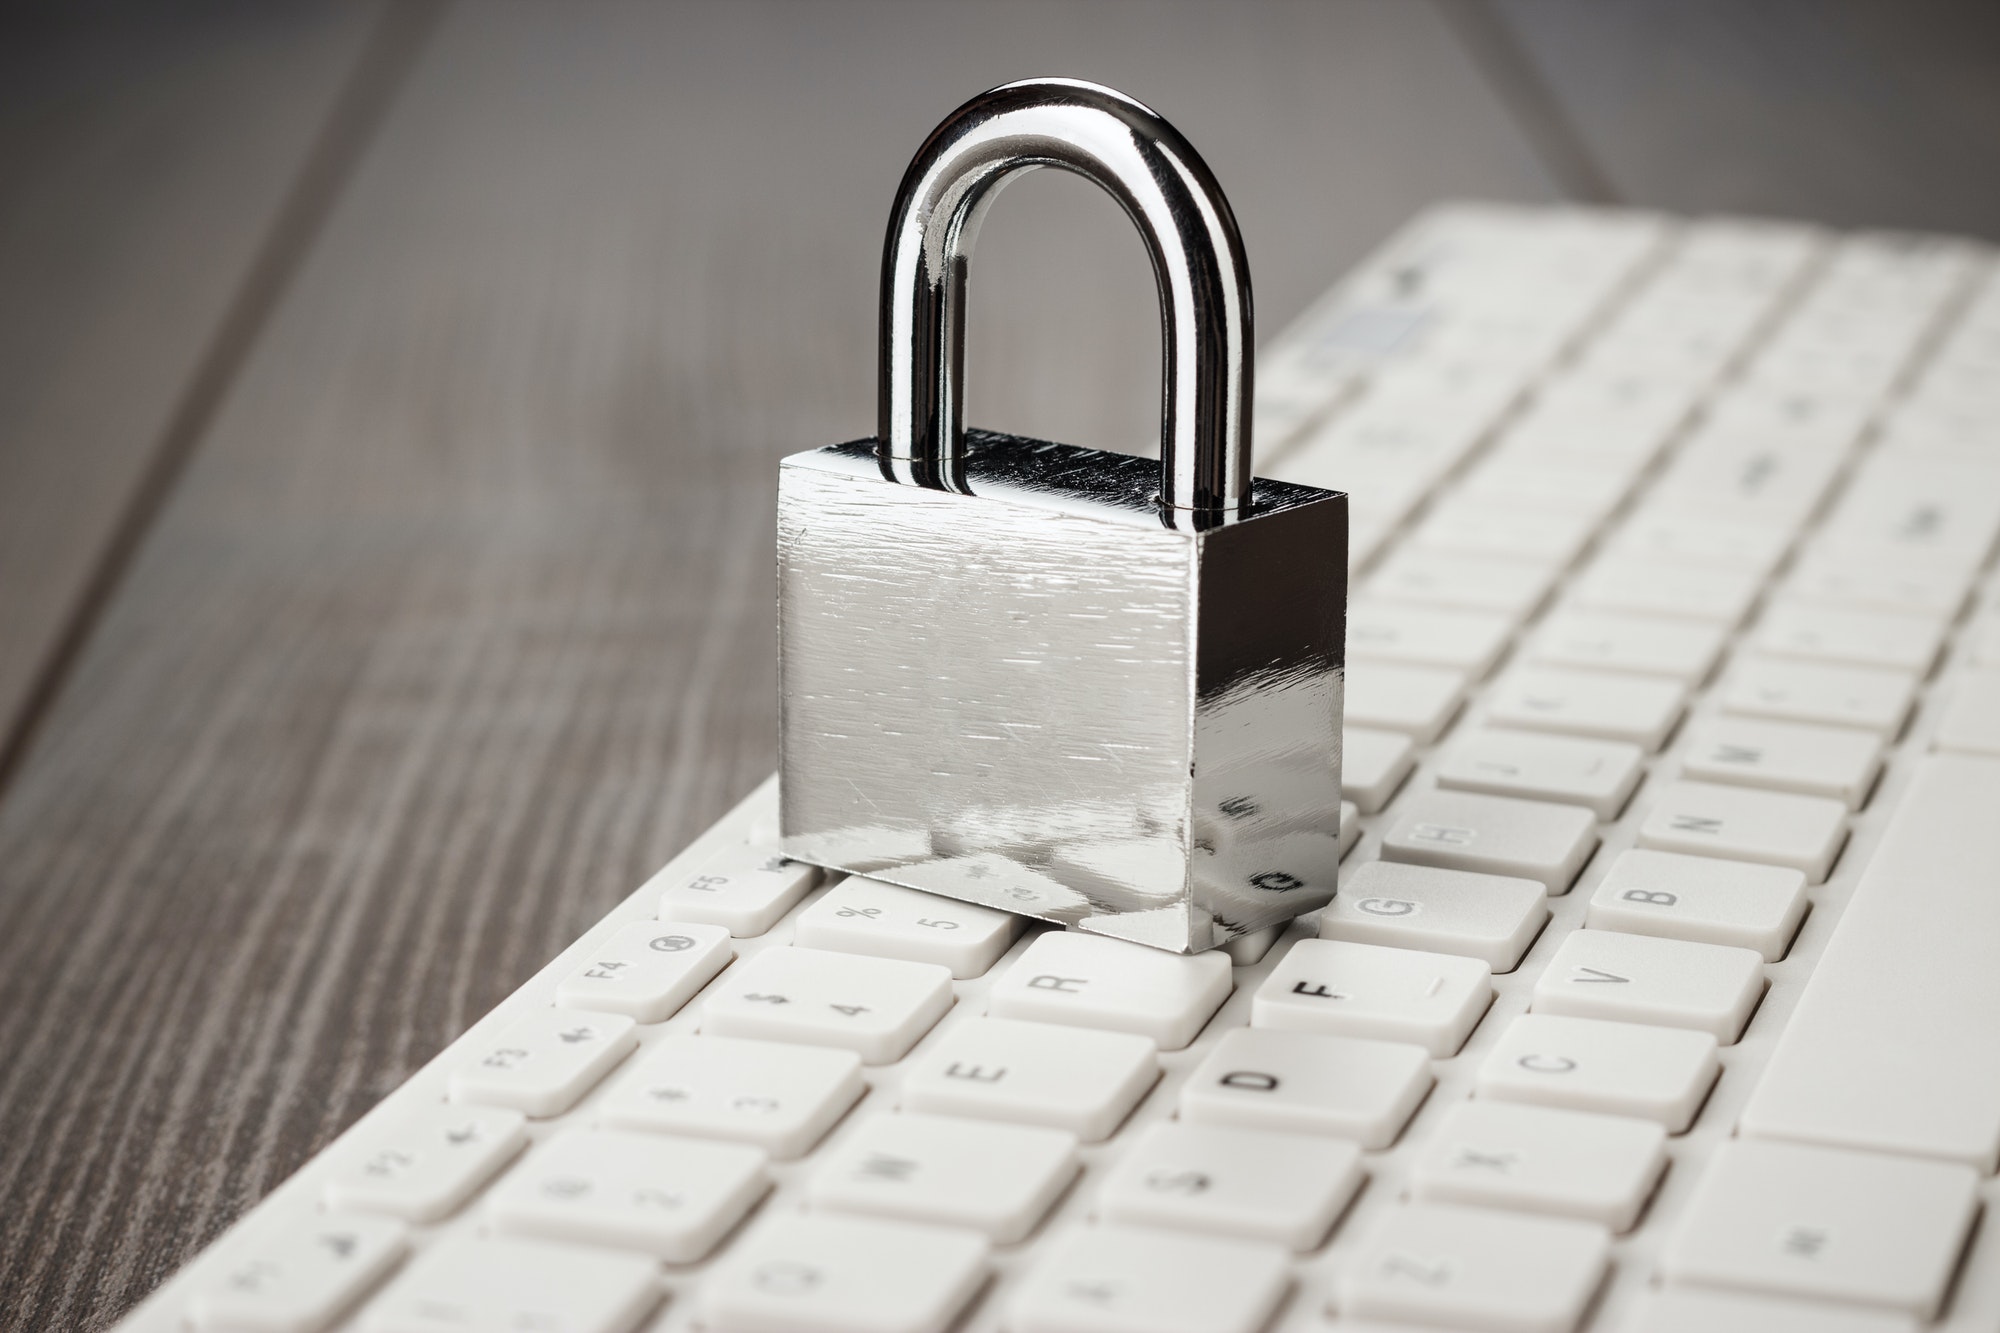 Padlock And White Computer Keyboard On The Wooden Office Table